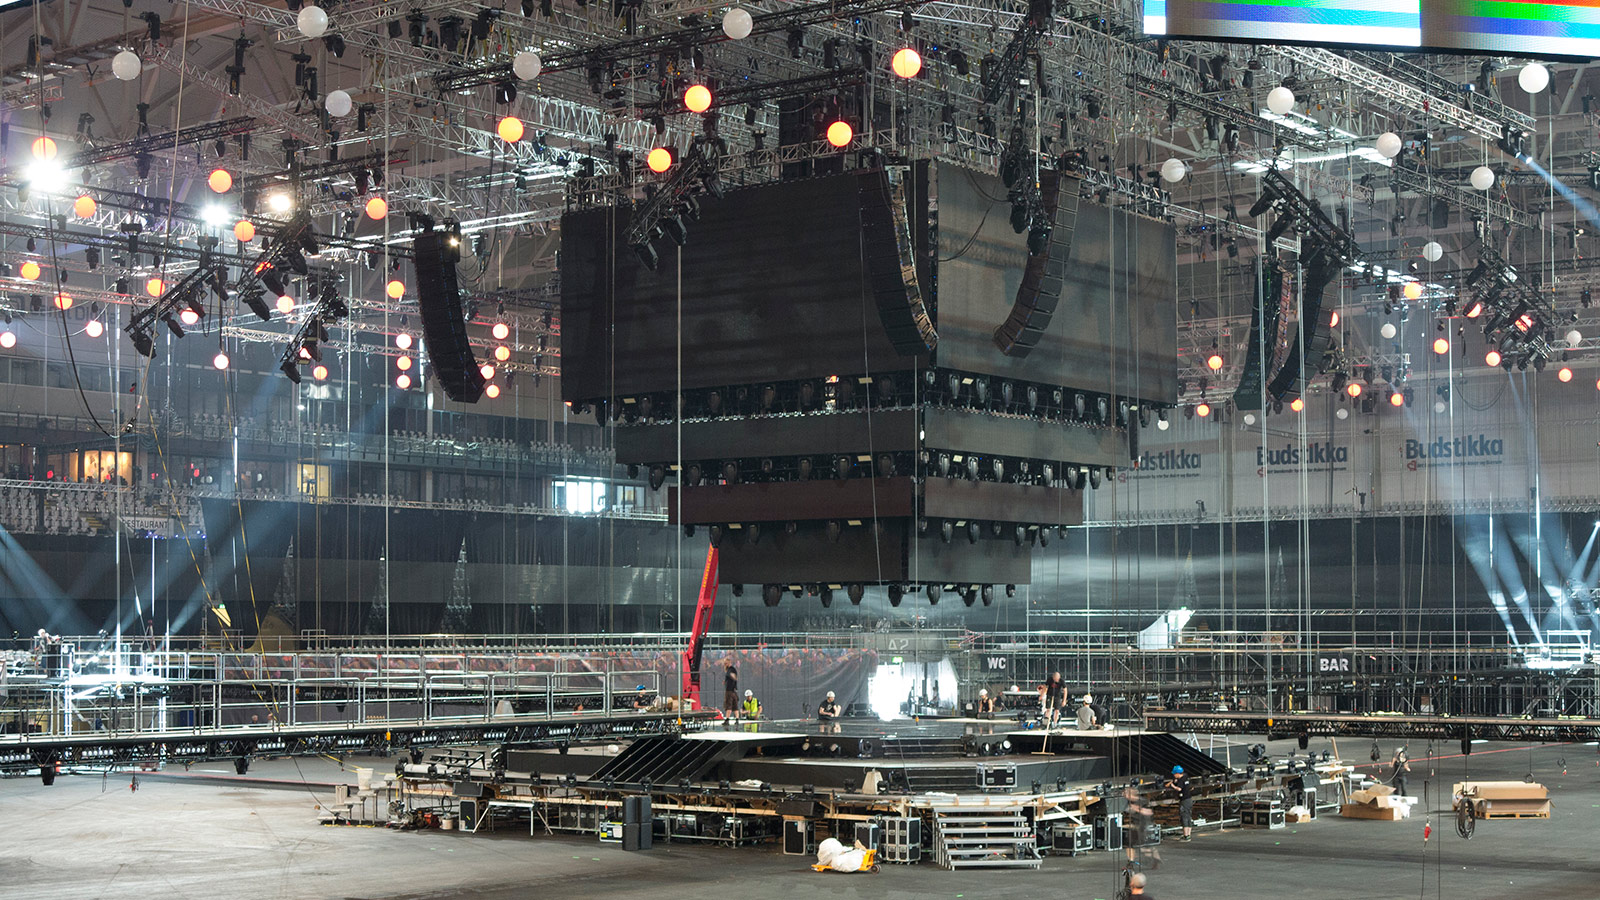 Bright Norway AS Deploys Largest Meyer Sound LYON System To Date